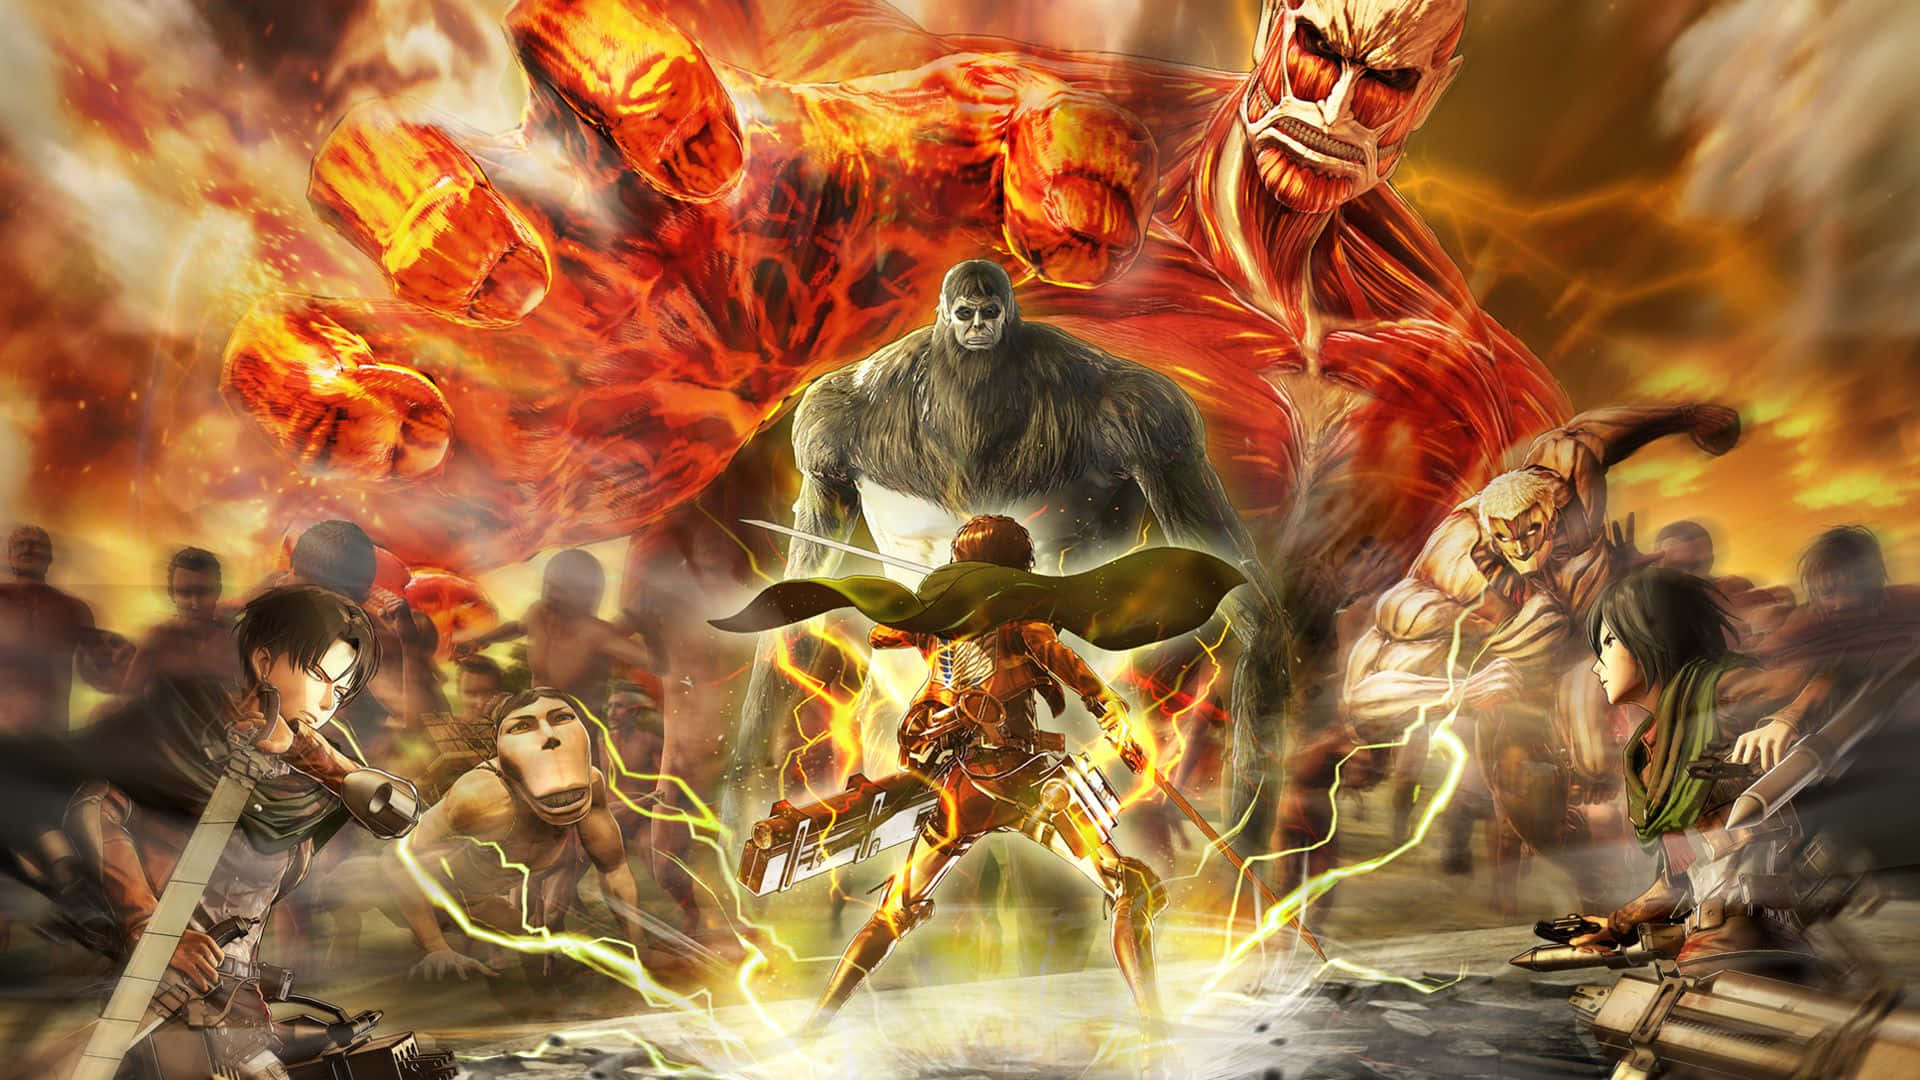 Fire and sparks fly in the explosive final battle from Attack on Titan 2 Wallpaper